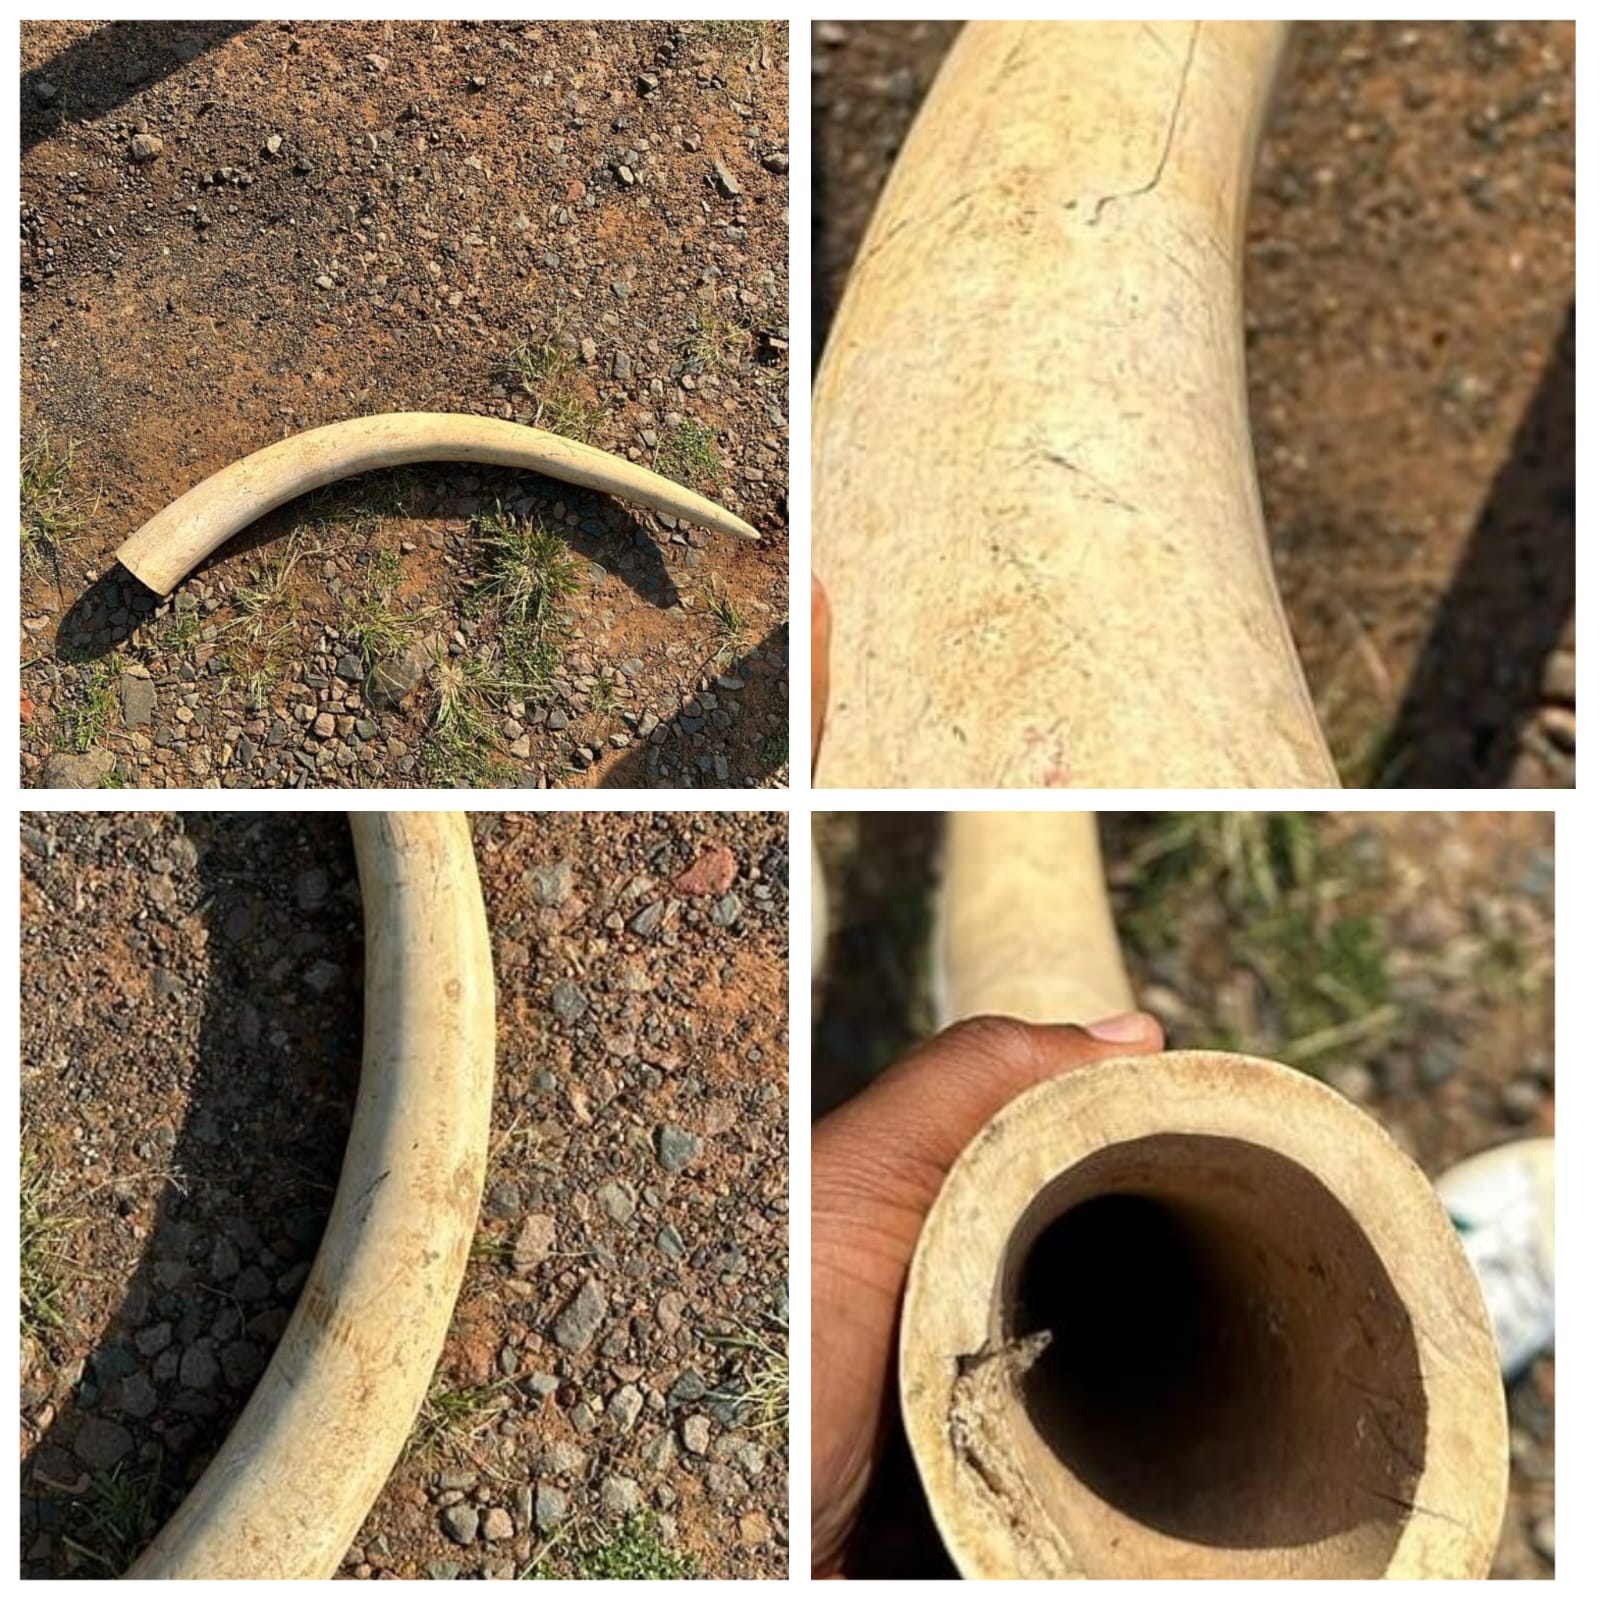 A 62-year-old male suspect from Newlands who was found in possession of an elephant tusk